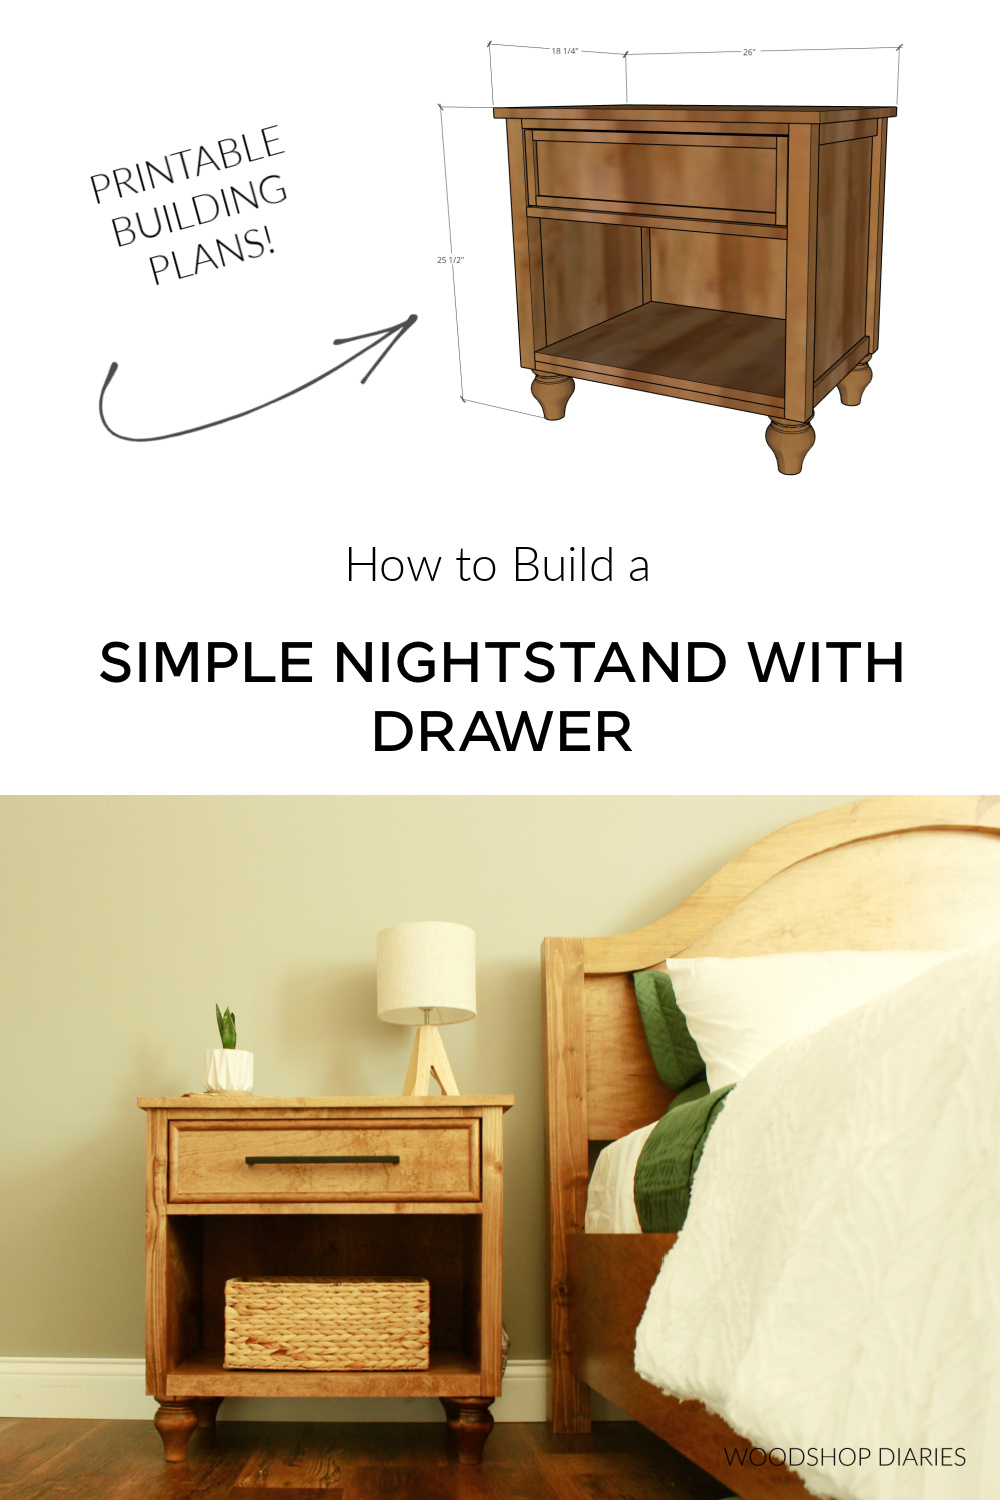 Pinterest collage image showing overall dimensional diagram at top and completed DIY nightstand on bottom with text "how to build a simple nightstand with drawer"